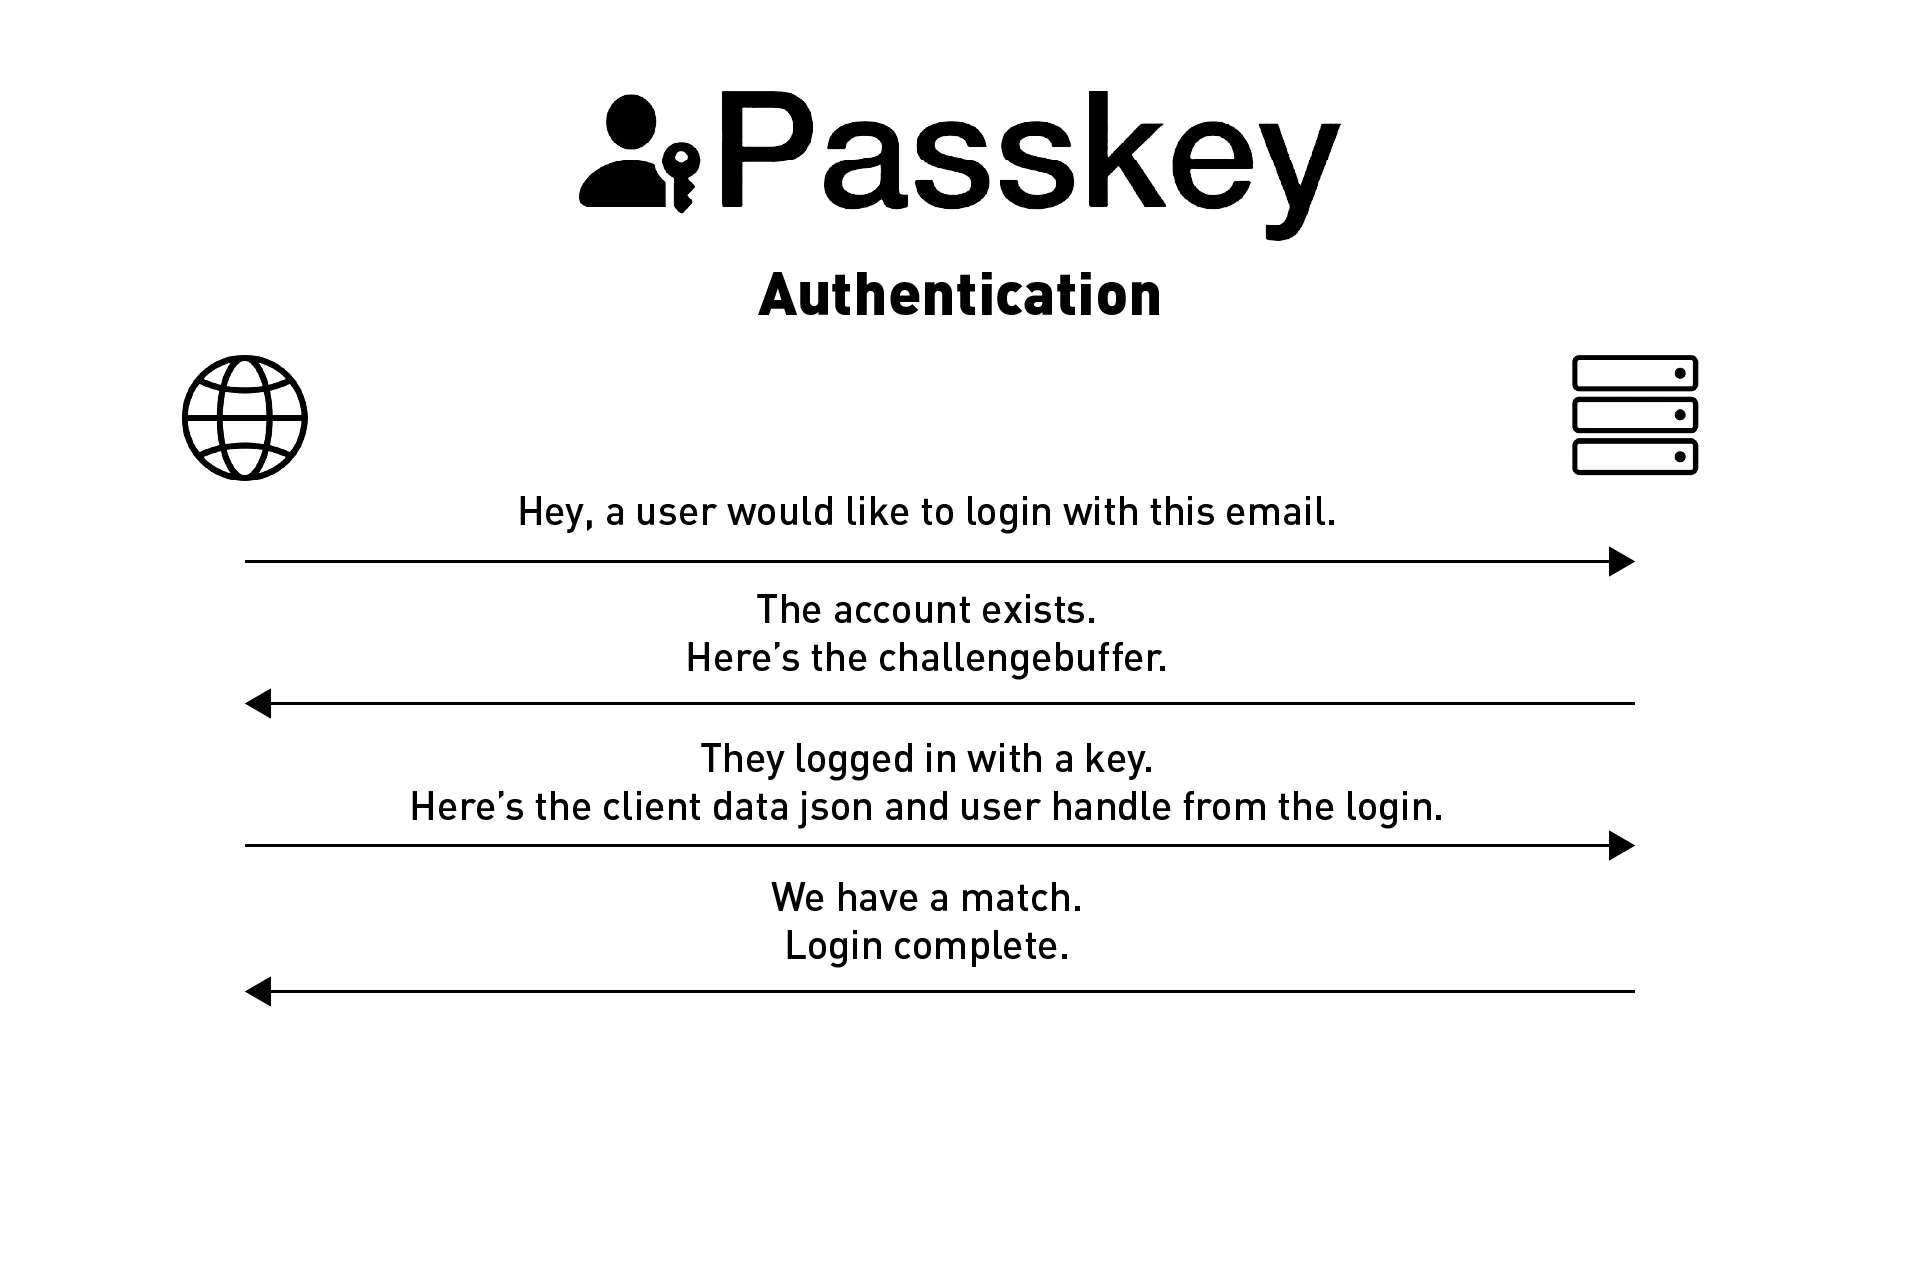 A diagram showing the authentication steps.